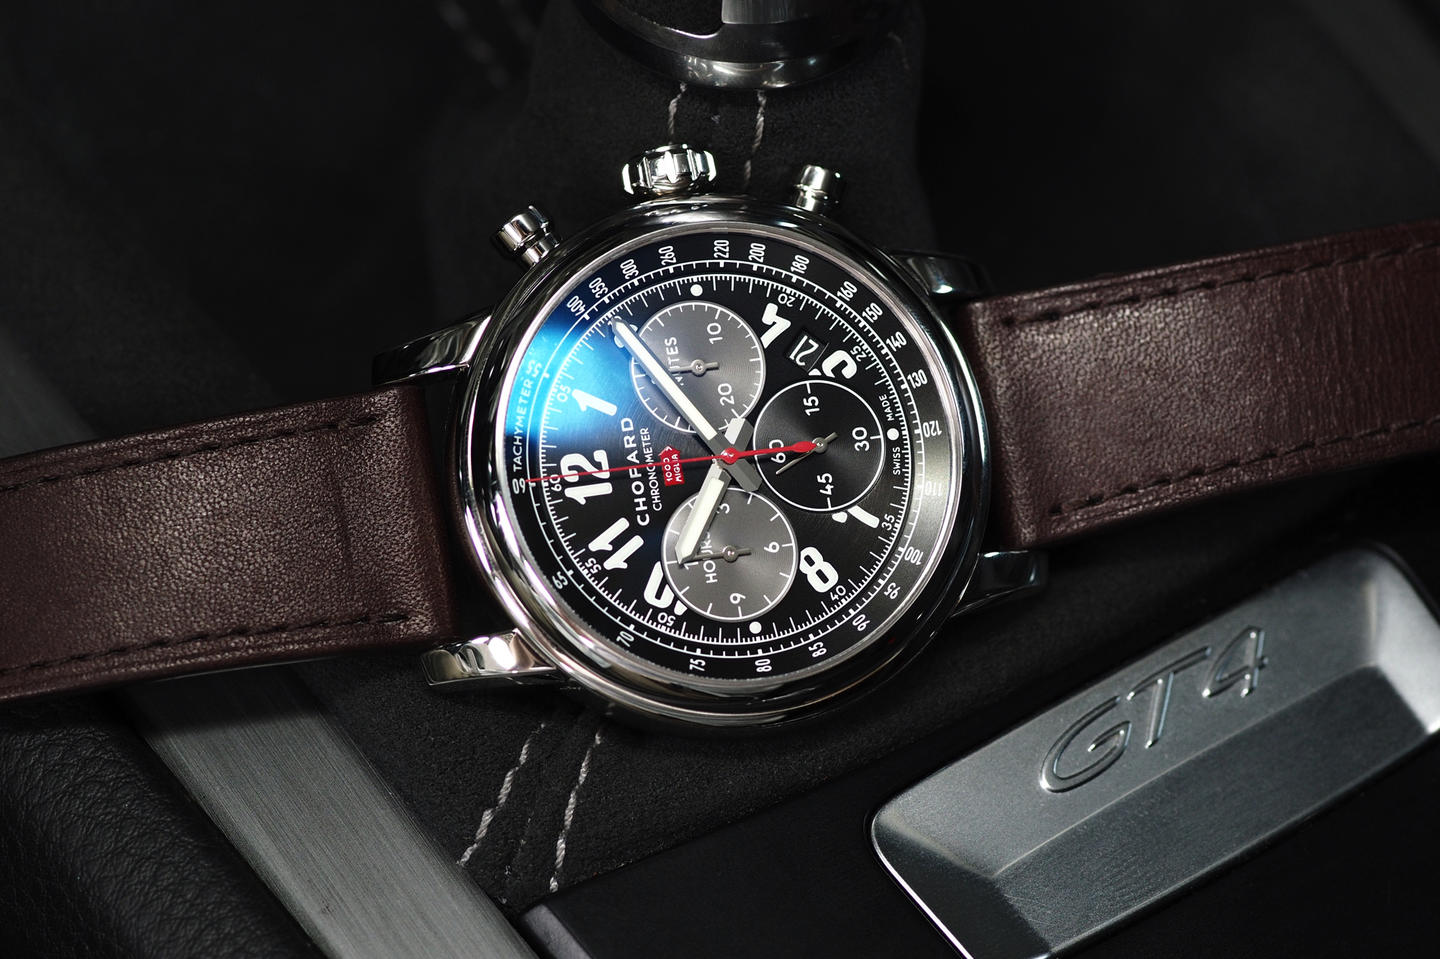 Watch Recommended : Reviewing Chopard Mille Miglia 2016 XL Race Edition Chronograph